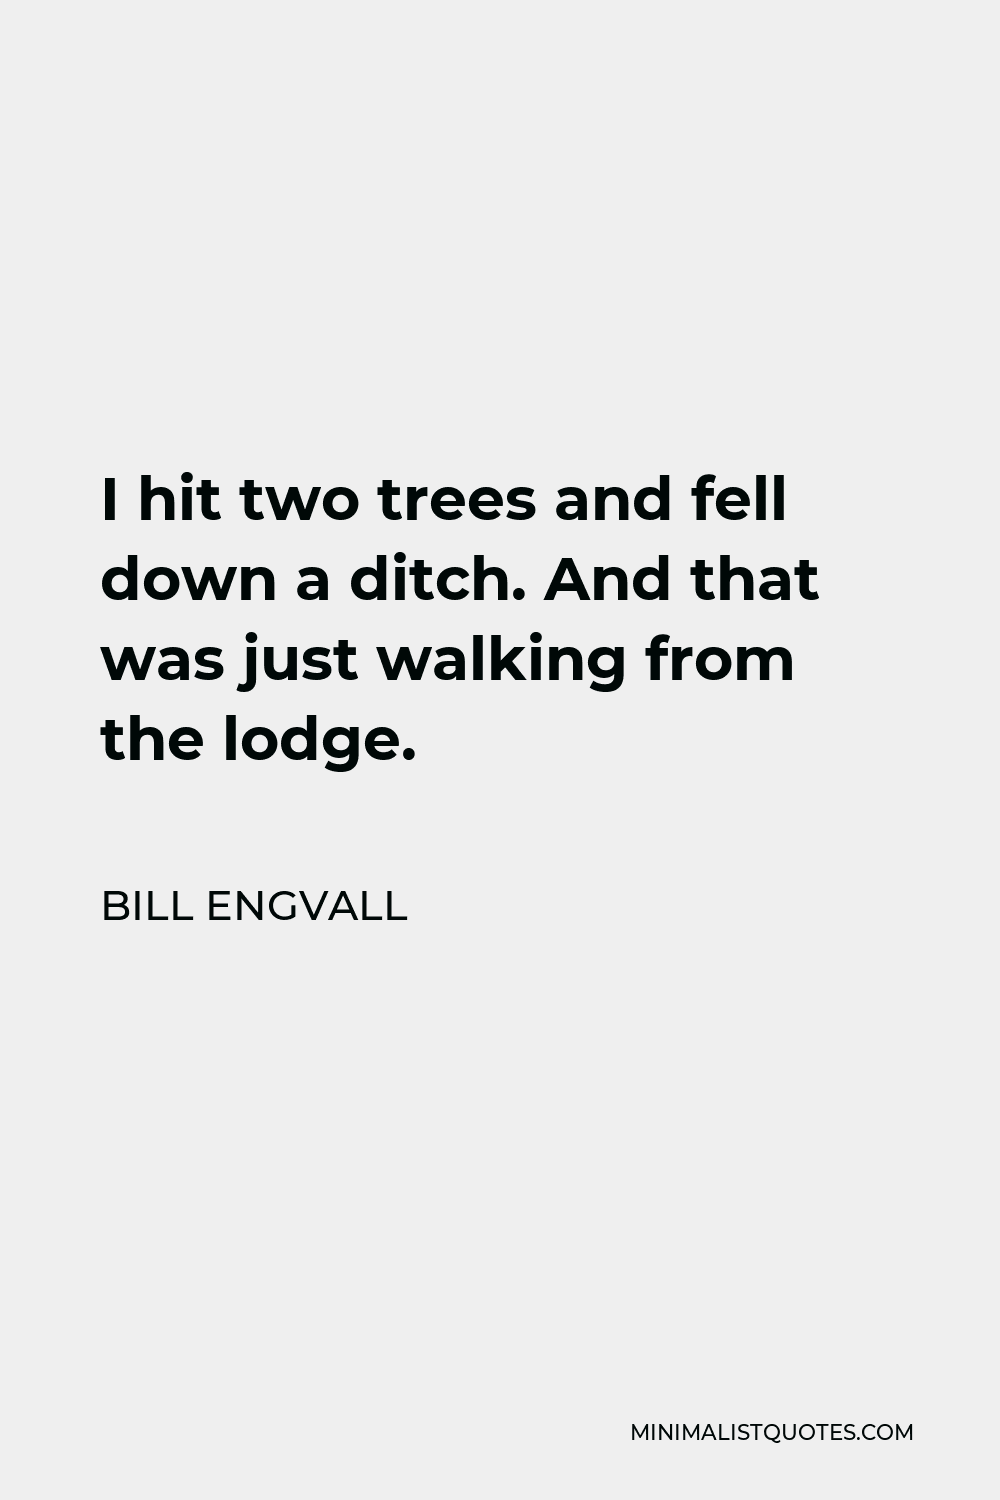 Bill Engvall Quote - I hit two trees and fell down a ditch. And that was just walking from the lodge.